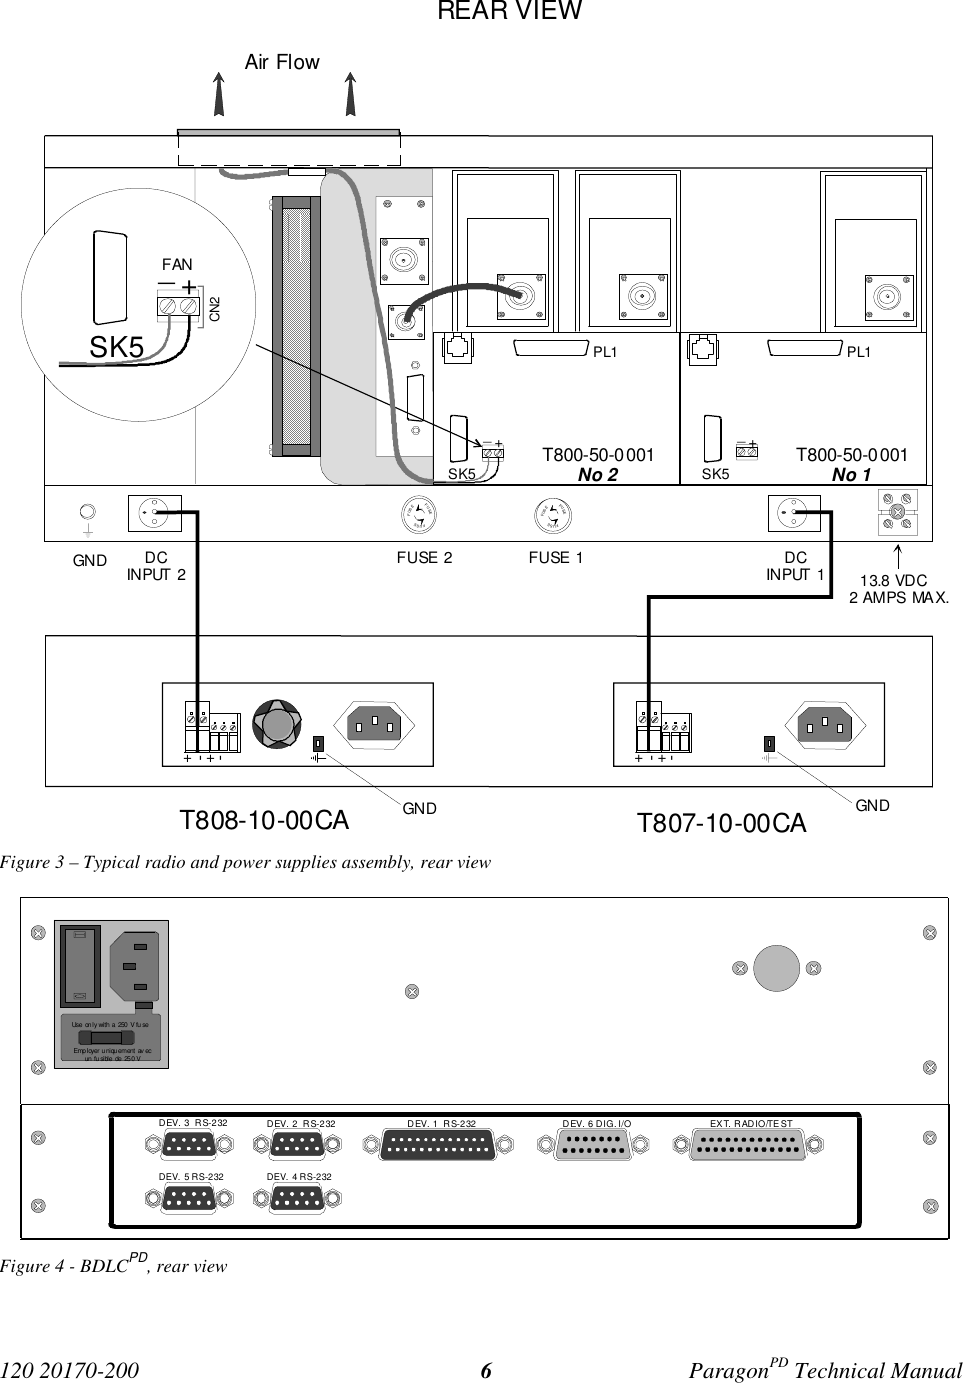 120 20170-200 ParagonPD Technical Manual6Figure 3 – Typical radio and power supplies assembly, rear viewFigure 4 - BDLCPD, rear viewEmployer uniquement avecun  fu si ble  de  250 VUse  on l y with  a  250  V fu seDEV. 3  RS-232DEV. 5  RS-232DEV. 2  RS-232DEV. 4  RS-232DEV. 1  RS-232 DEV. 6 DIG. I/O EXT. RADIO/TESTT808-10-00CA T807-10-00CAREAR VIEWAir FlowGNDDCINPUT 1FUSE 1FUSE 2DCINPUT 2 13.8 VDC2 AMPS MAX.FUSEFUSEFUSEFUSEFUSEFUSE+-+-+-+-GNDGNDT800-50-0001No 1PL1SK5T800-50-0001No 2PL1SK5_+_+SK5_+FANCN2